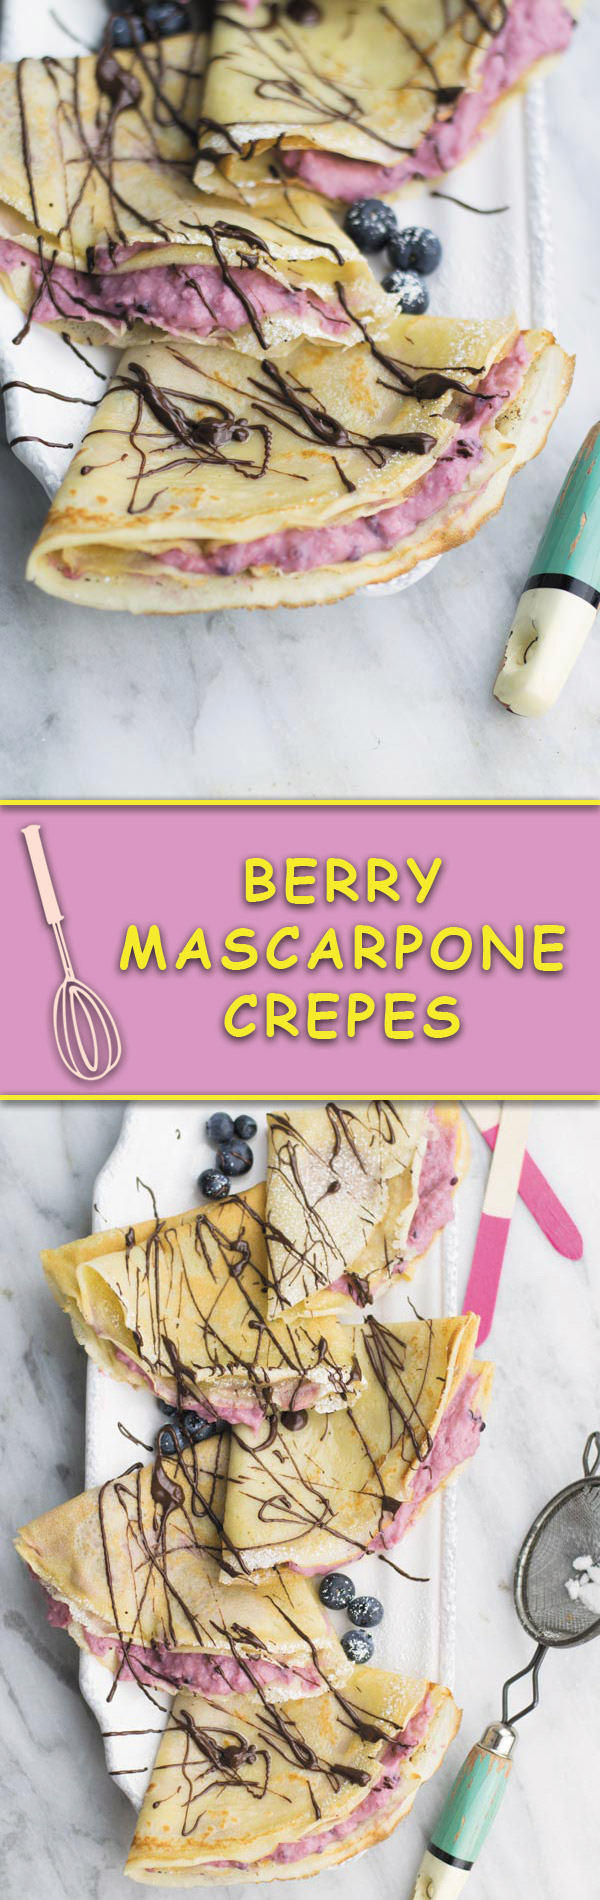 Berry Mascarpone Crepes - delicious from scratch crepes filled with this insanely addicting mixed berries & mascarpone cheese filling.